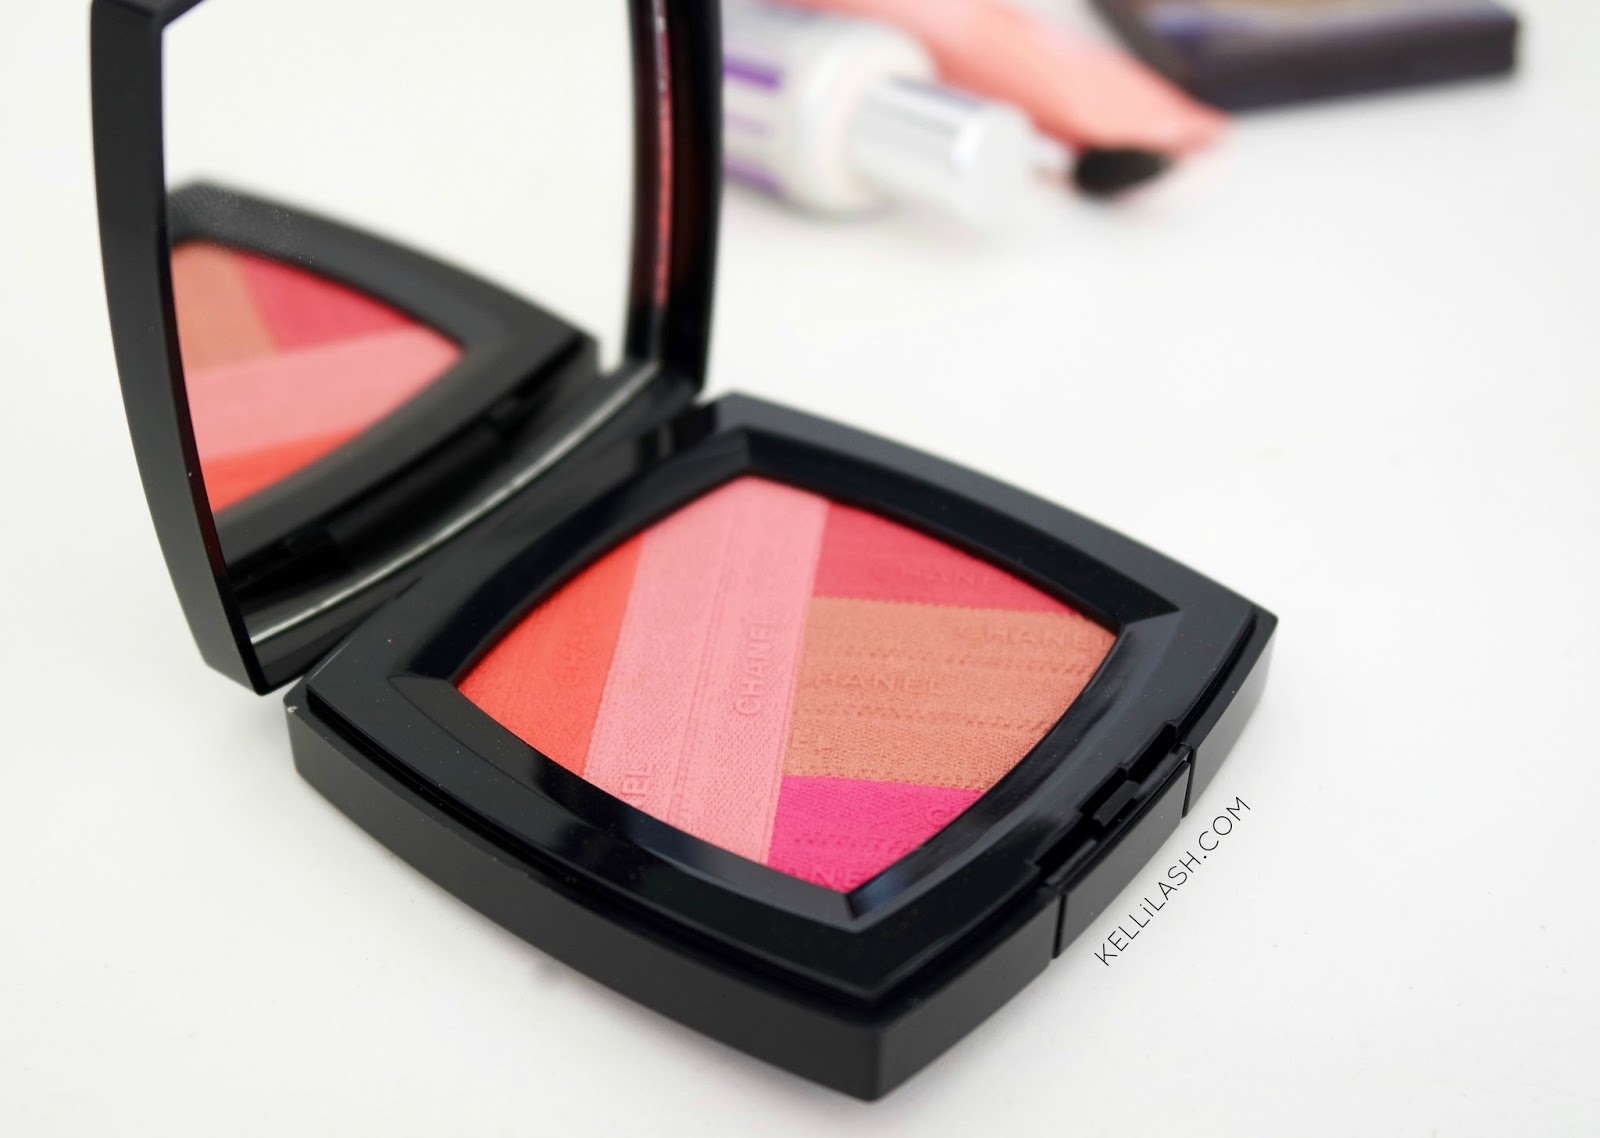 Chanel Spring 2016 L.A. Sunrise Collection: Review and Swatches